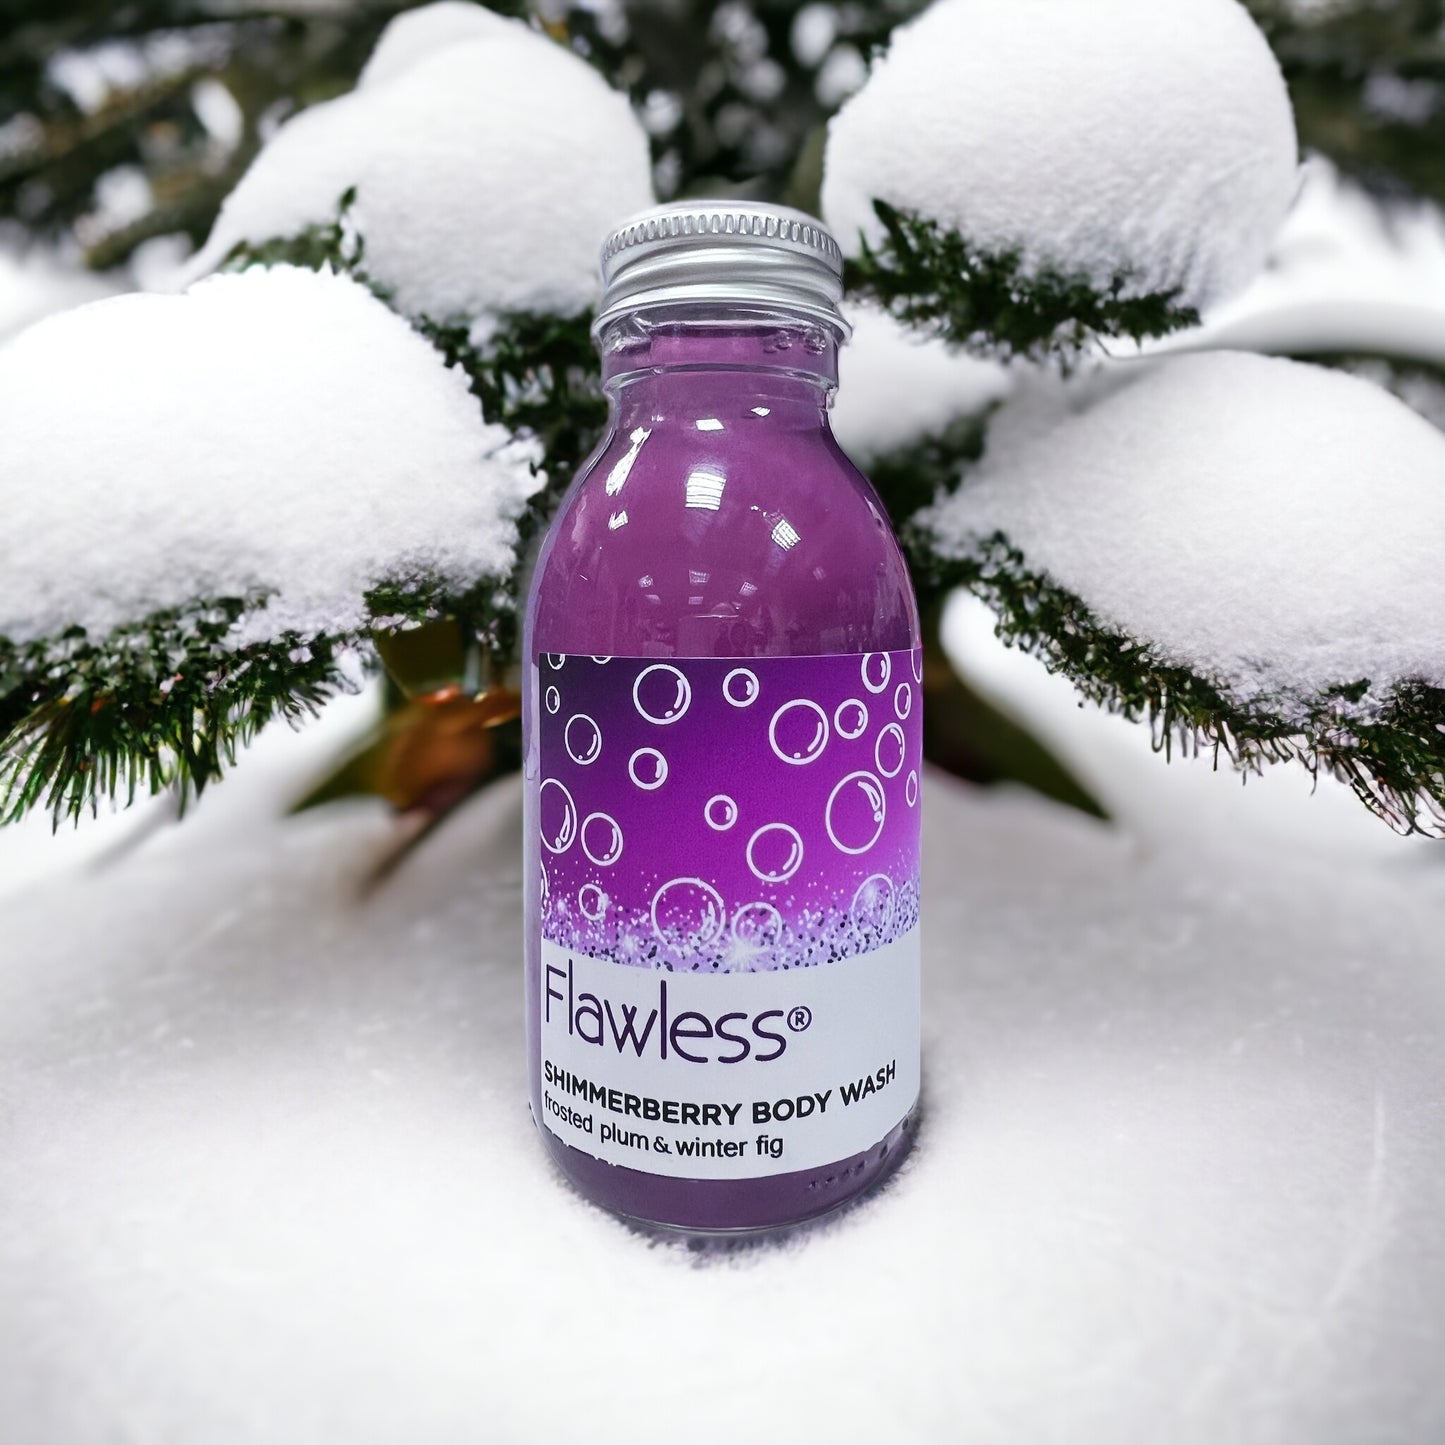 Shimmerberry Frosted Plum and Winter Fig Body Wash.